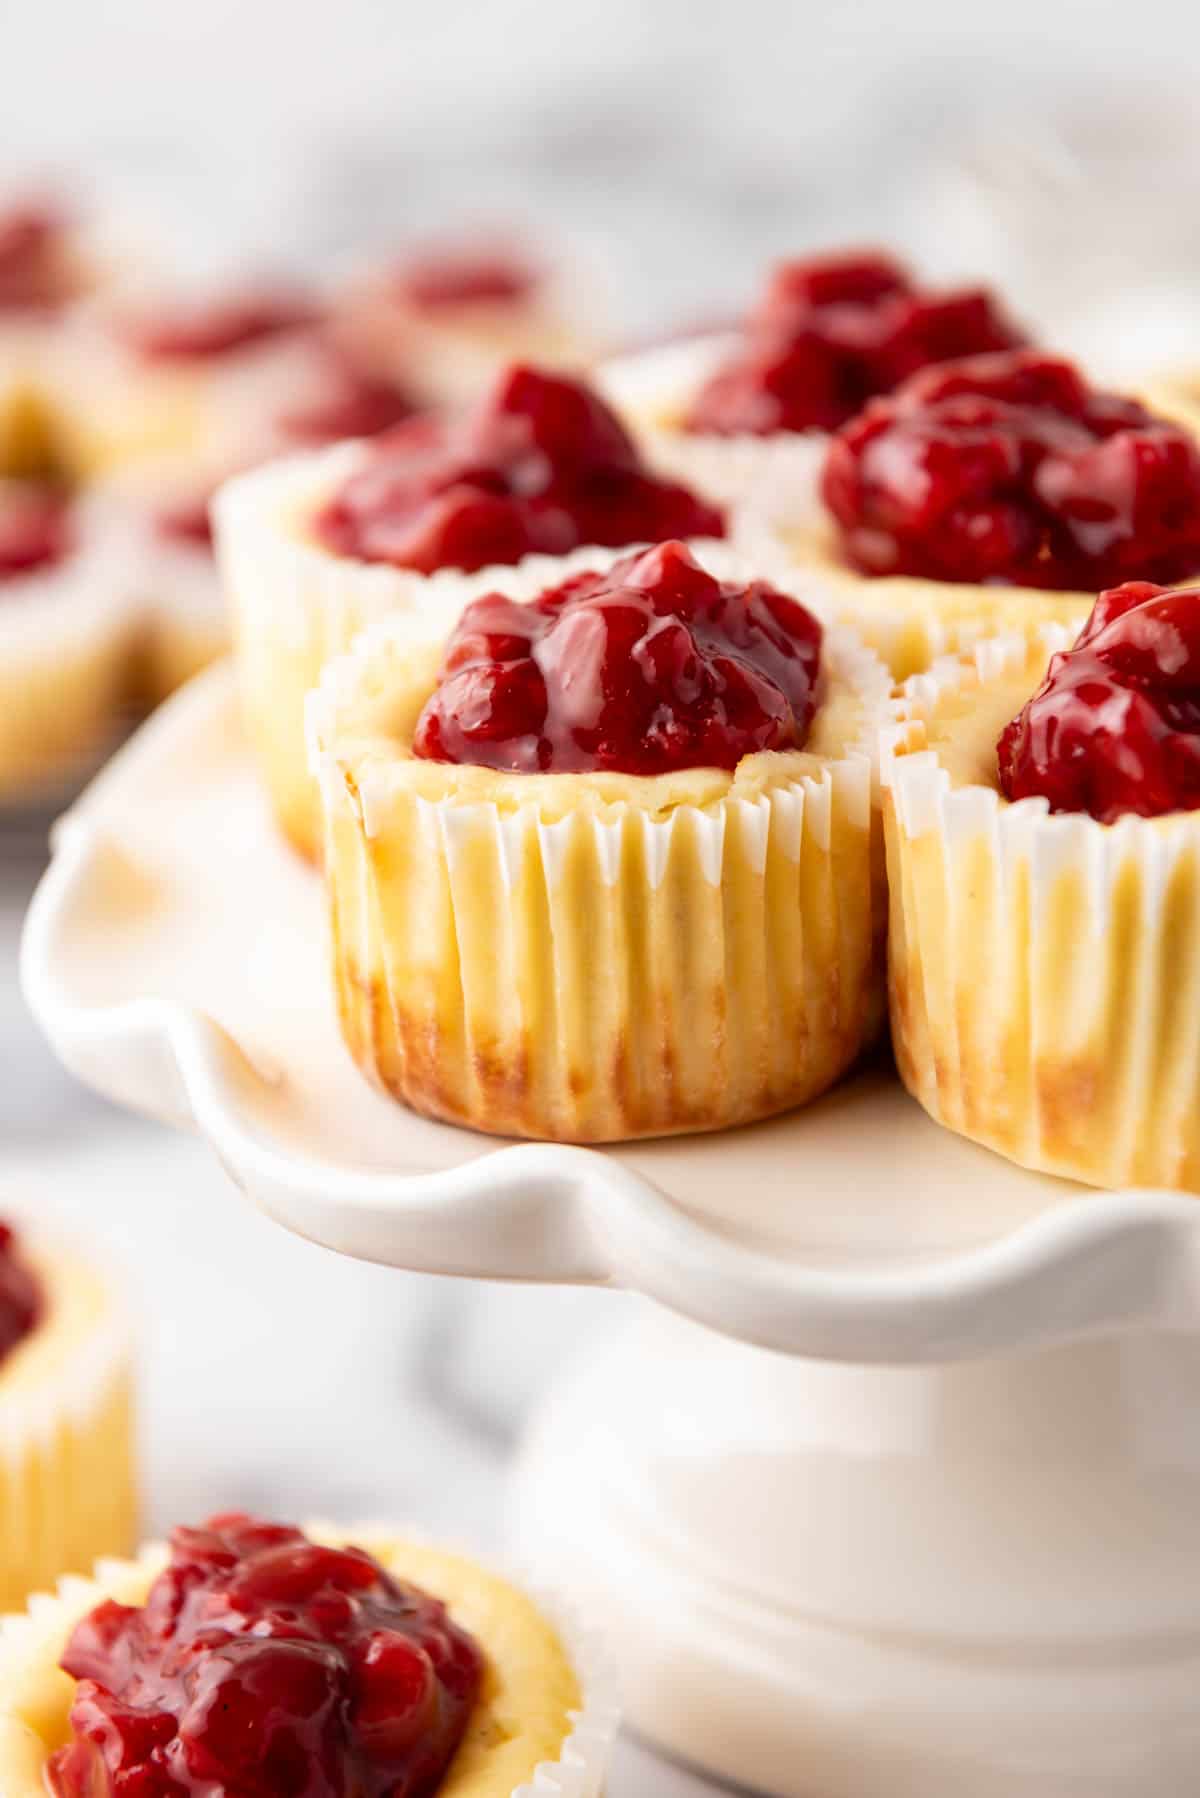 A close image of cherry cheesecake tarts on a white cake stand.